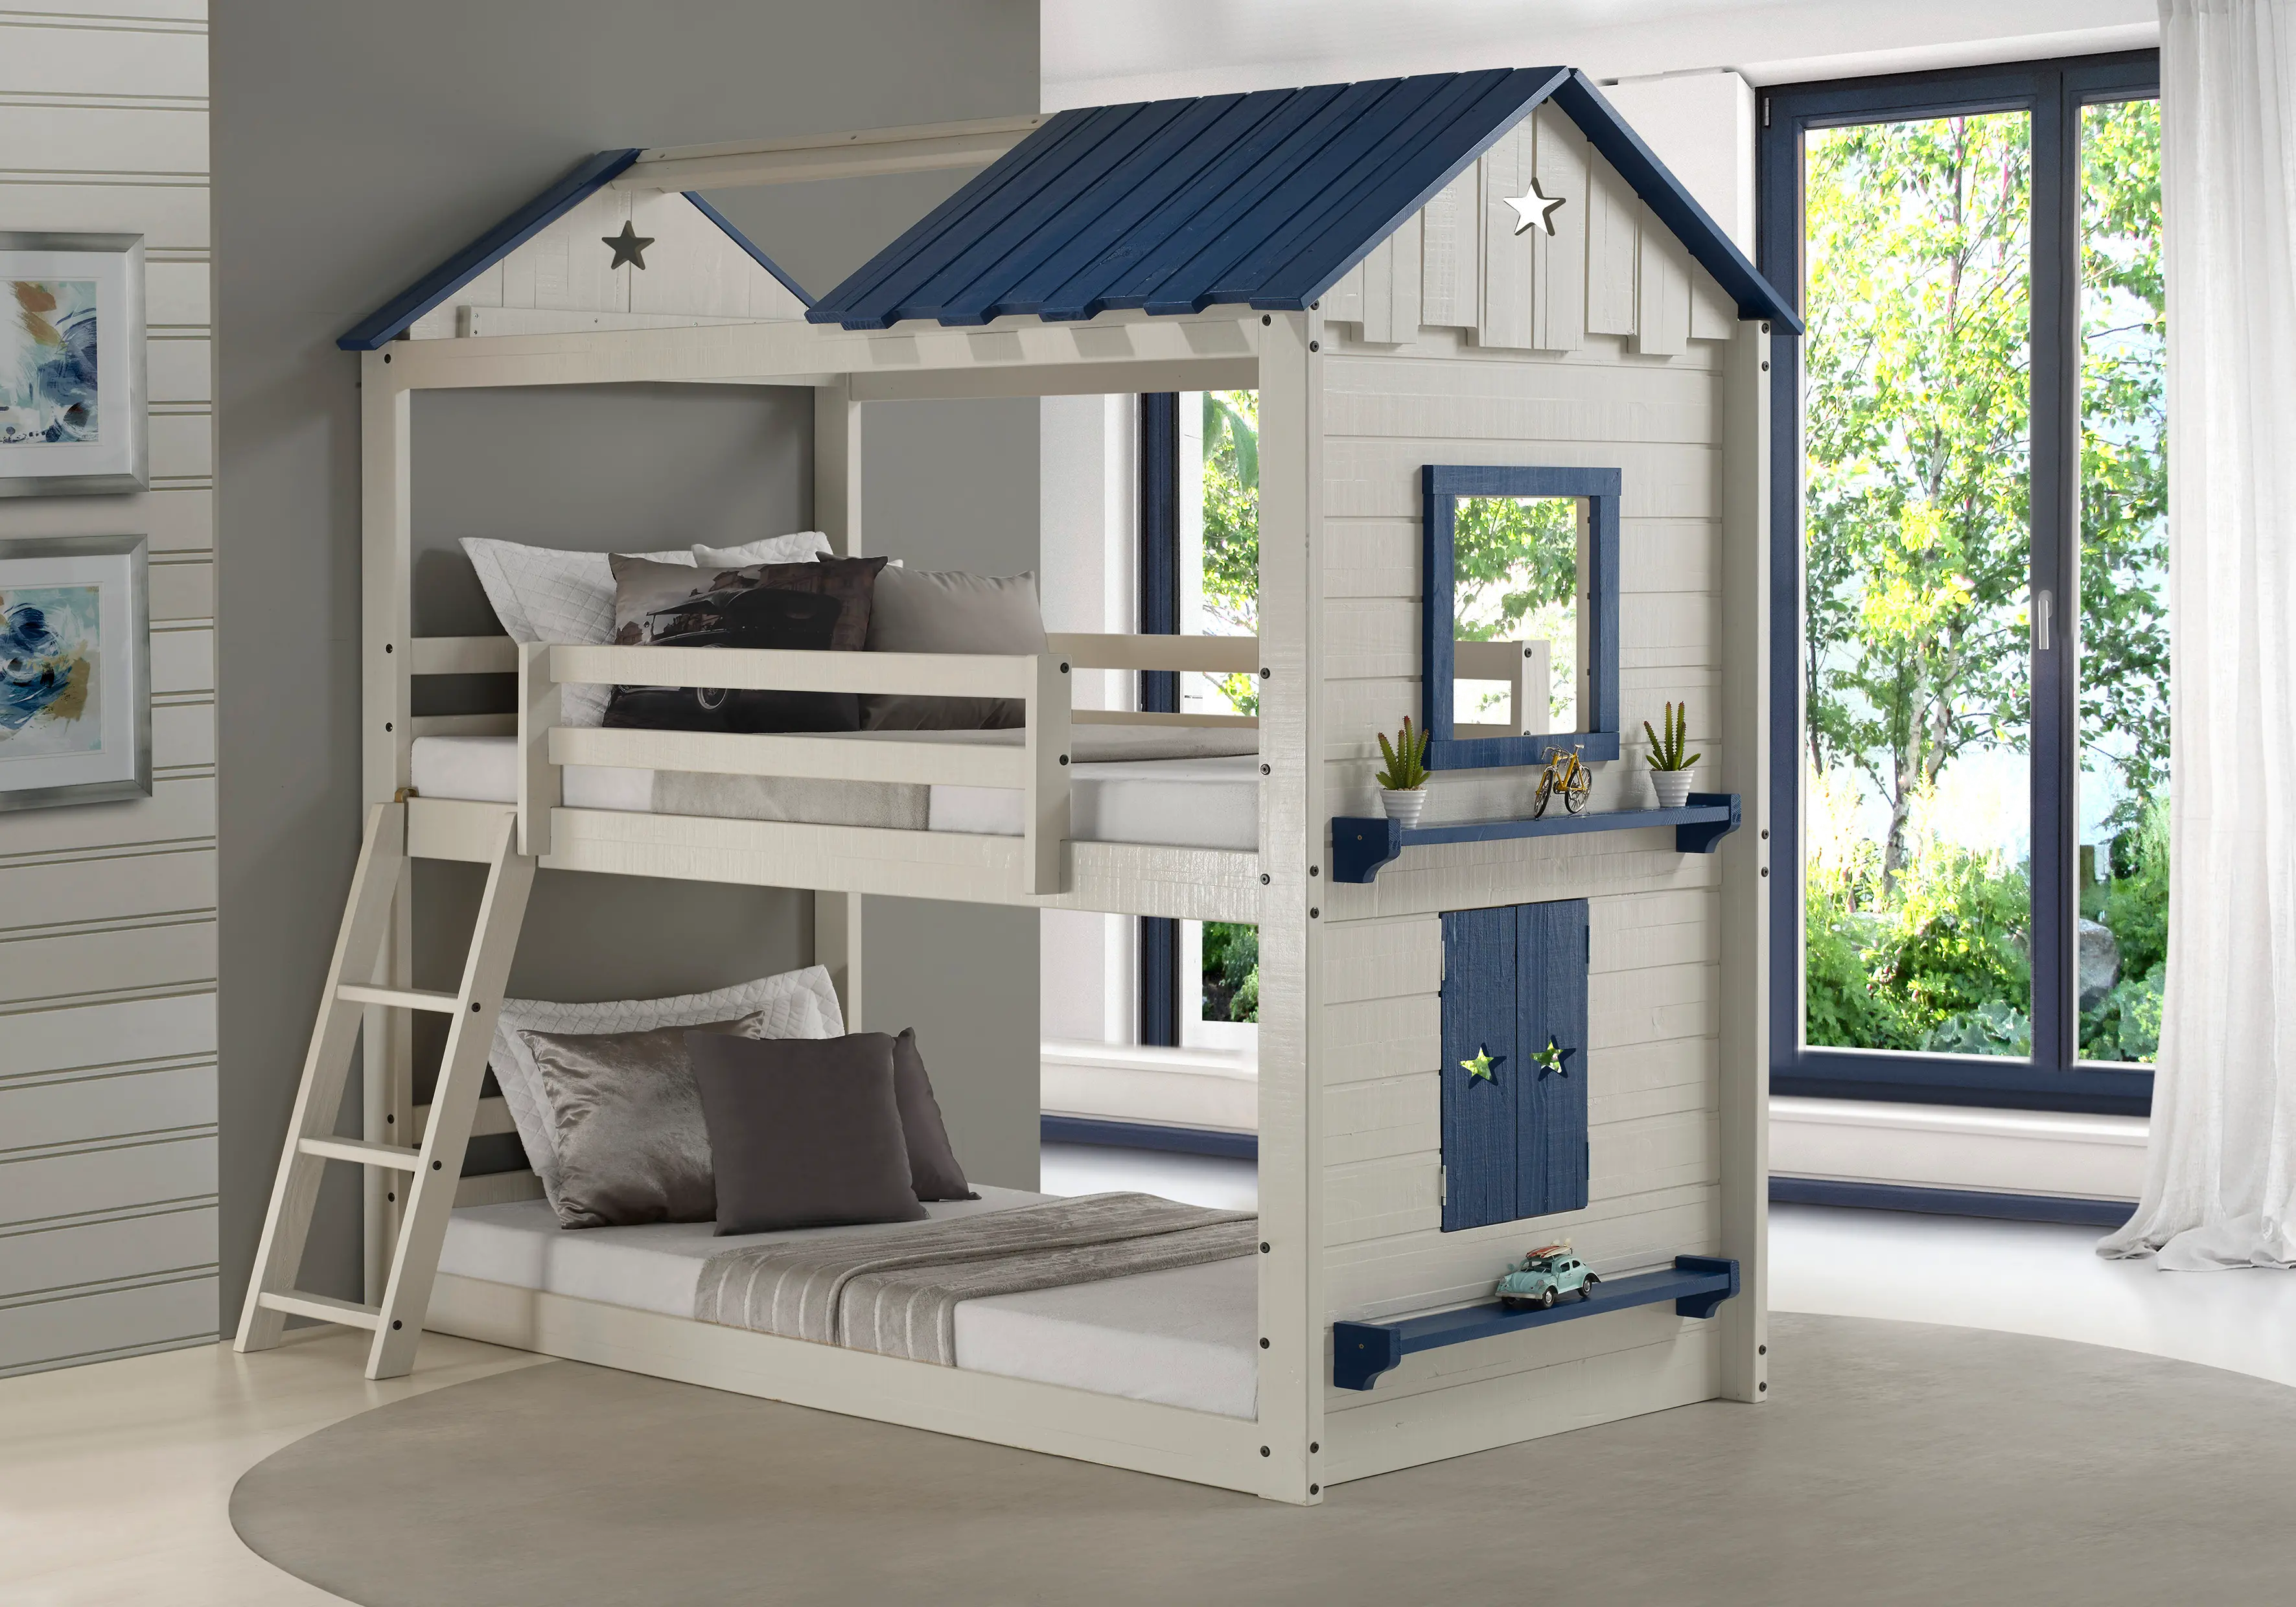 1580-TTLGB White and Blue Twin-over-Twin Bunk Bed - Star Gaze sku 1580-TTLGB